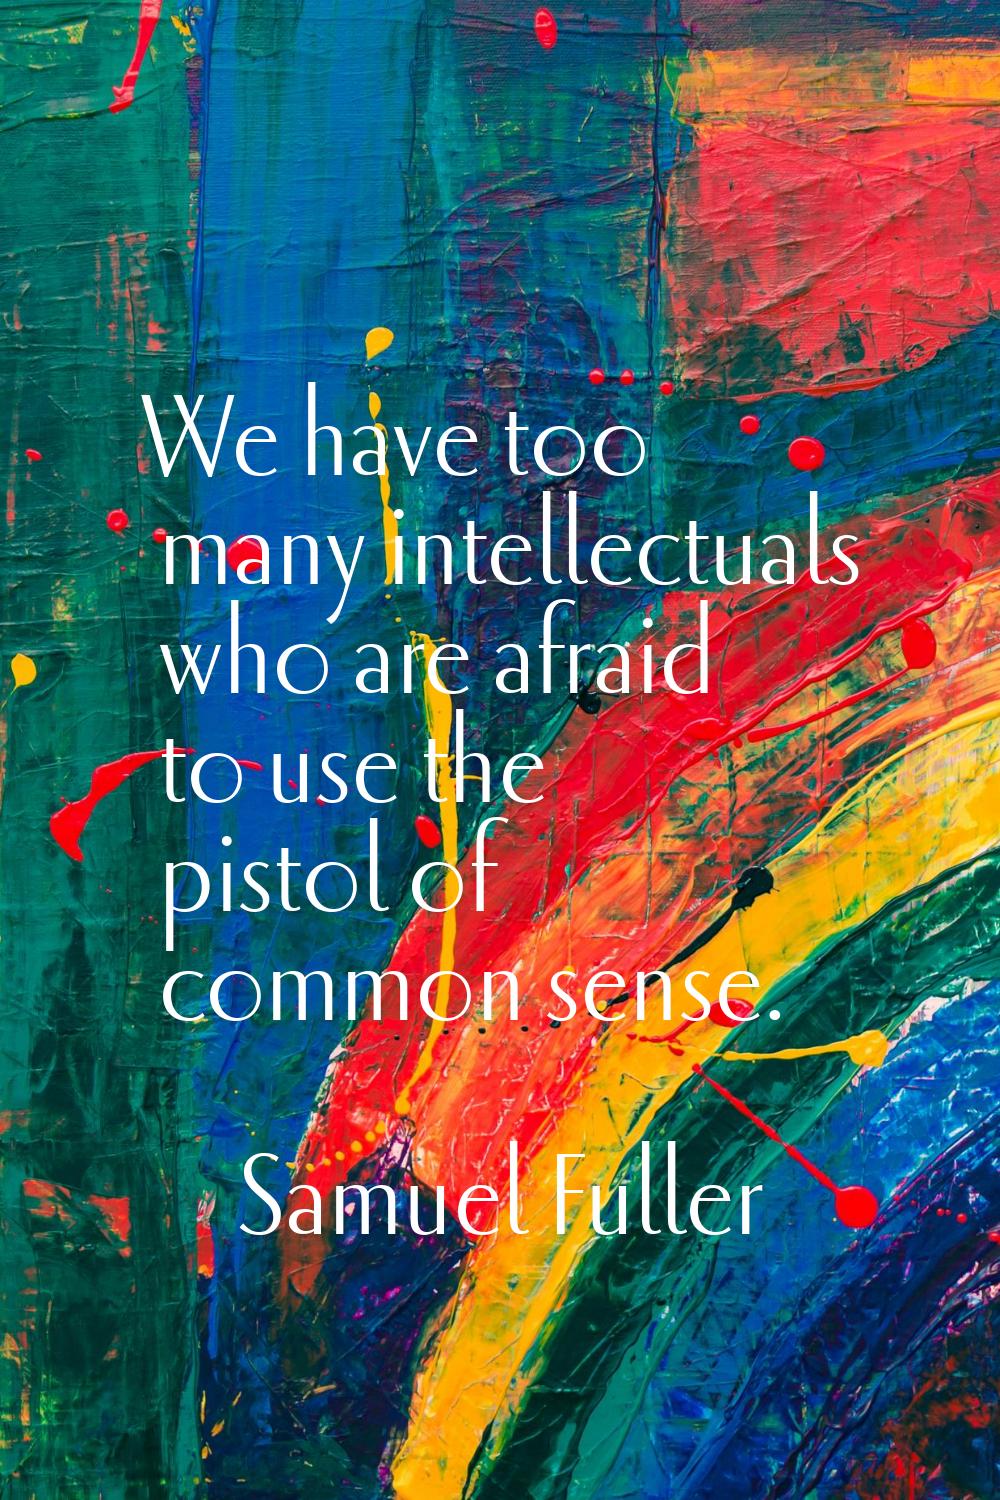 We have too many intellectuals who are afraid to use the pistol of common sense.